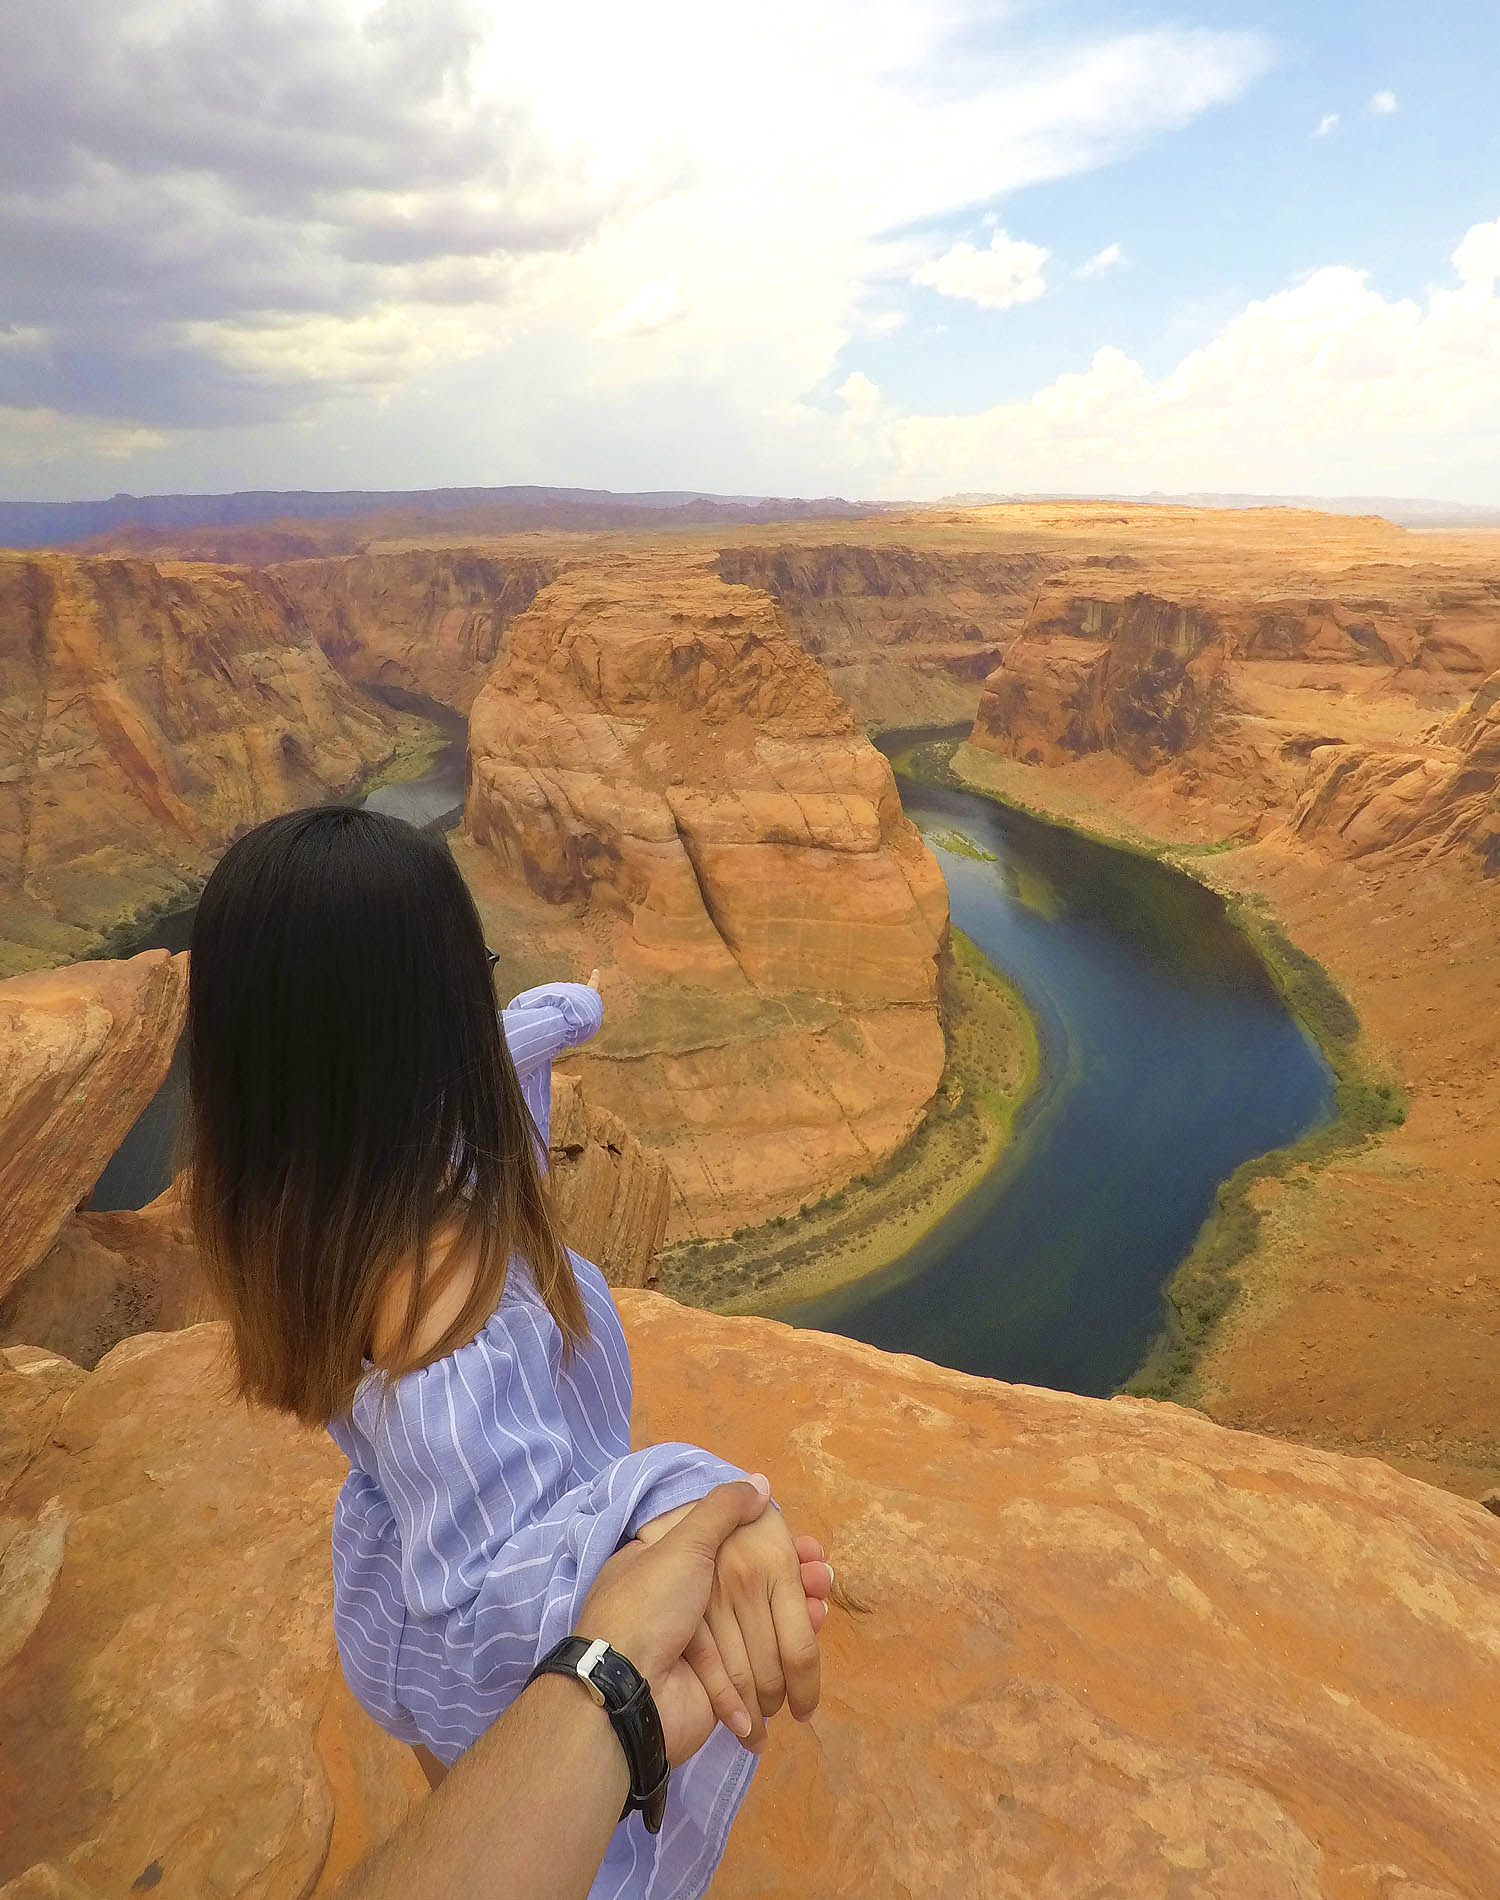 Plan a Visit to the Horseshoe Bend Canyon